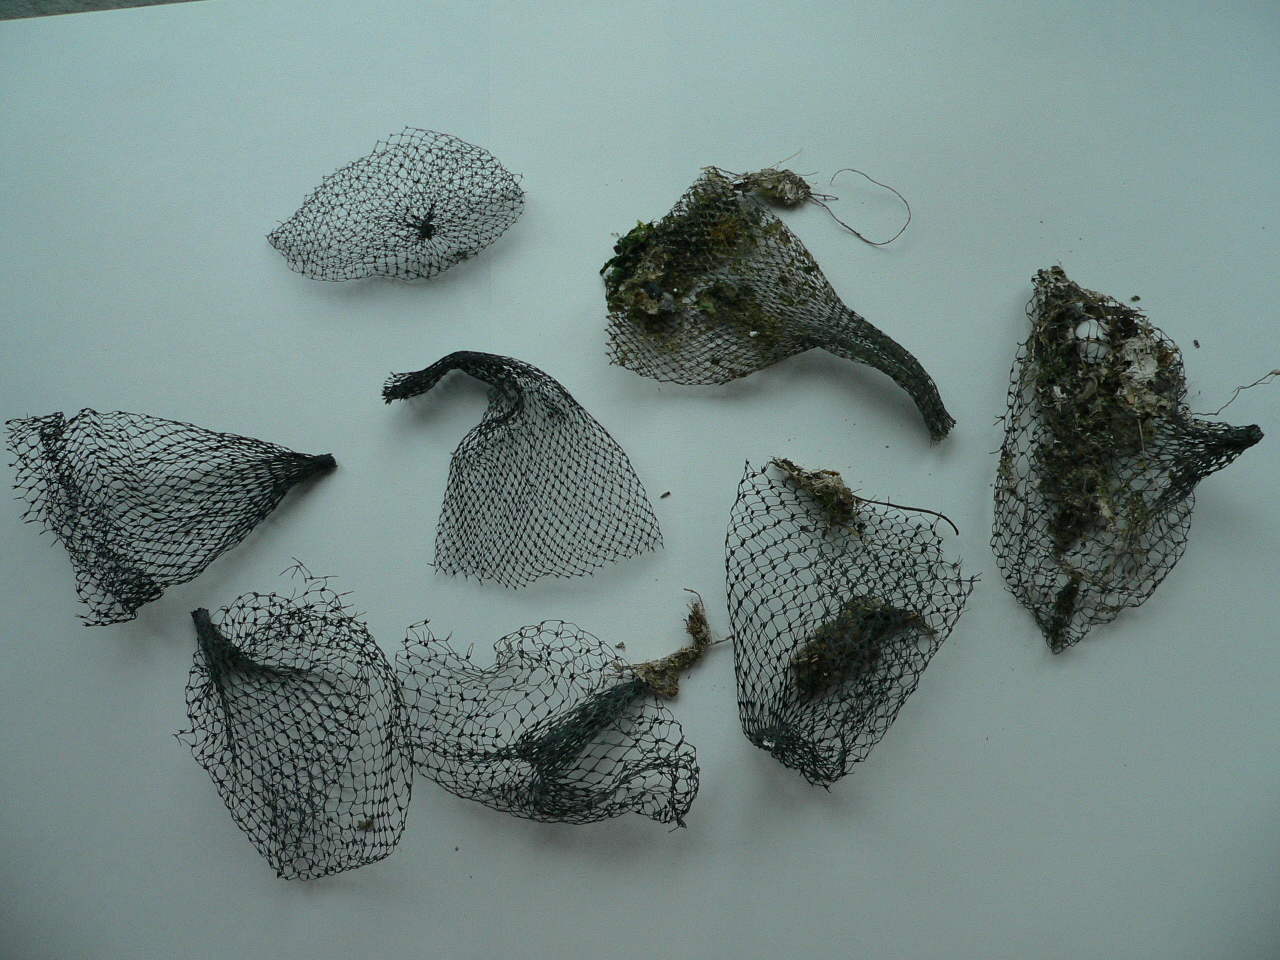 Net tops which escaped from geoduck farm on Zangle Cove 2006